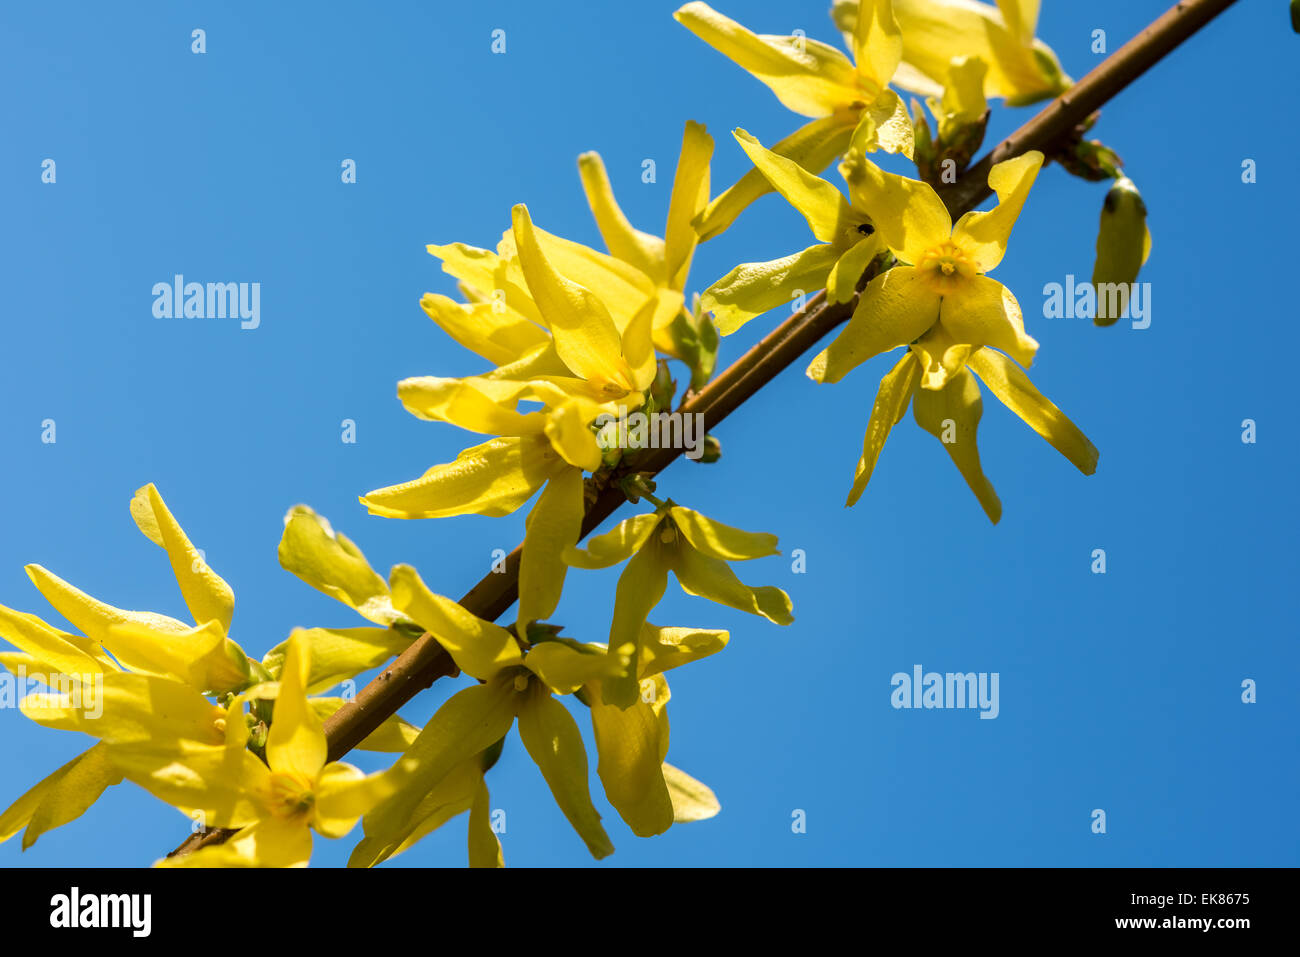 Forsythia Tree Flowers In Spring Time Stock Photo